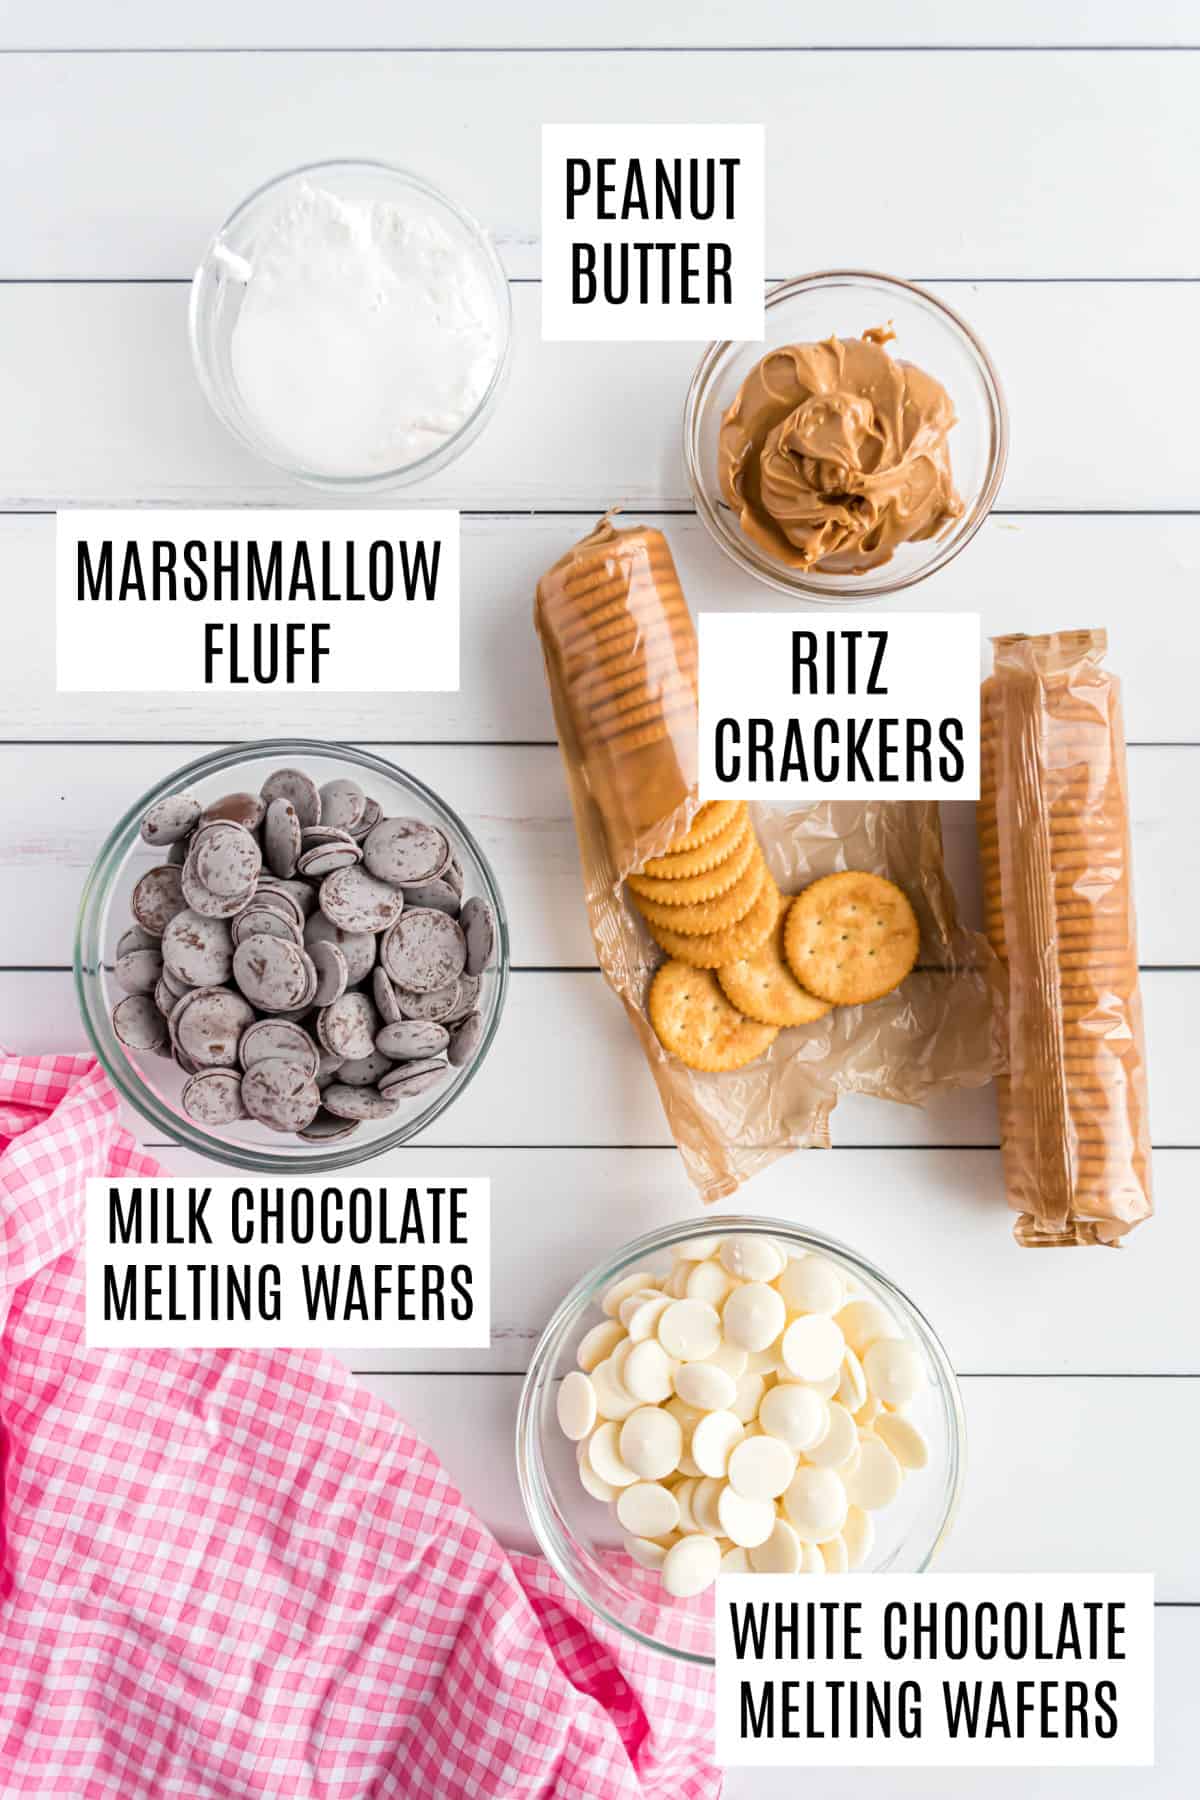 Ingredients needed to make chocolate covered ritz.